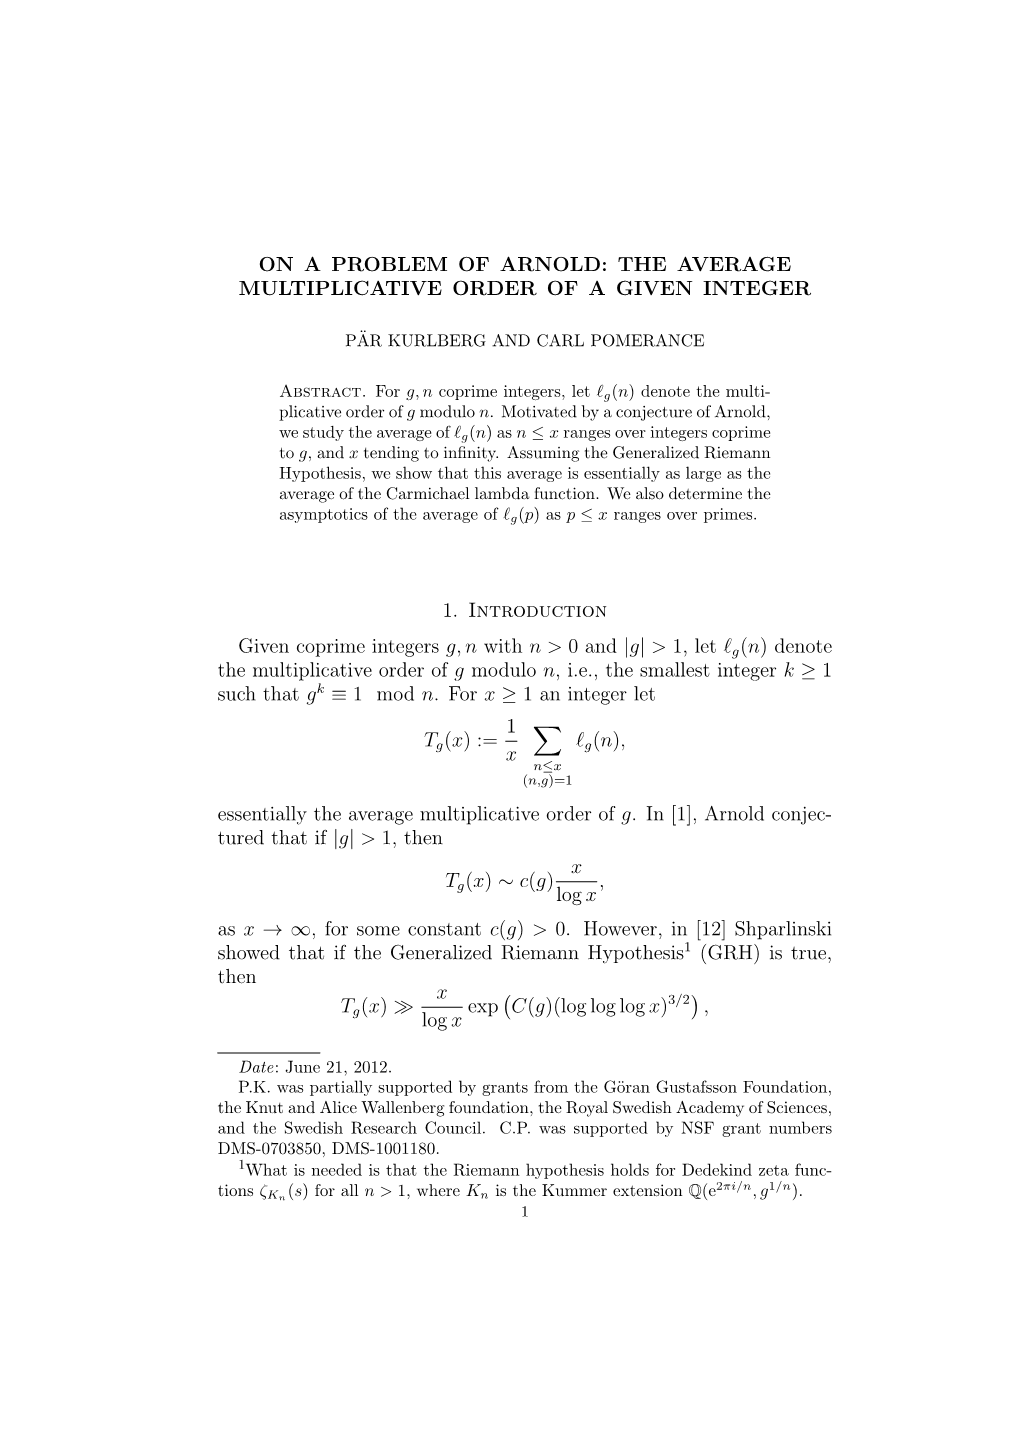 On a Problem of Arnold: the Average Multiplicative Order of a Given Integer